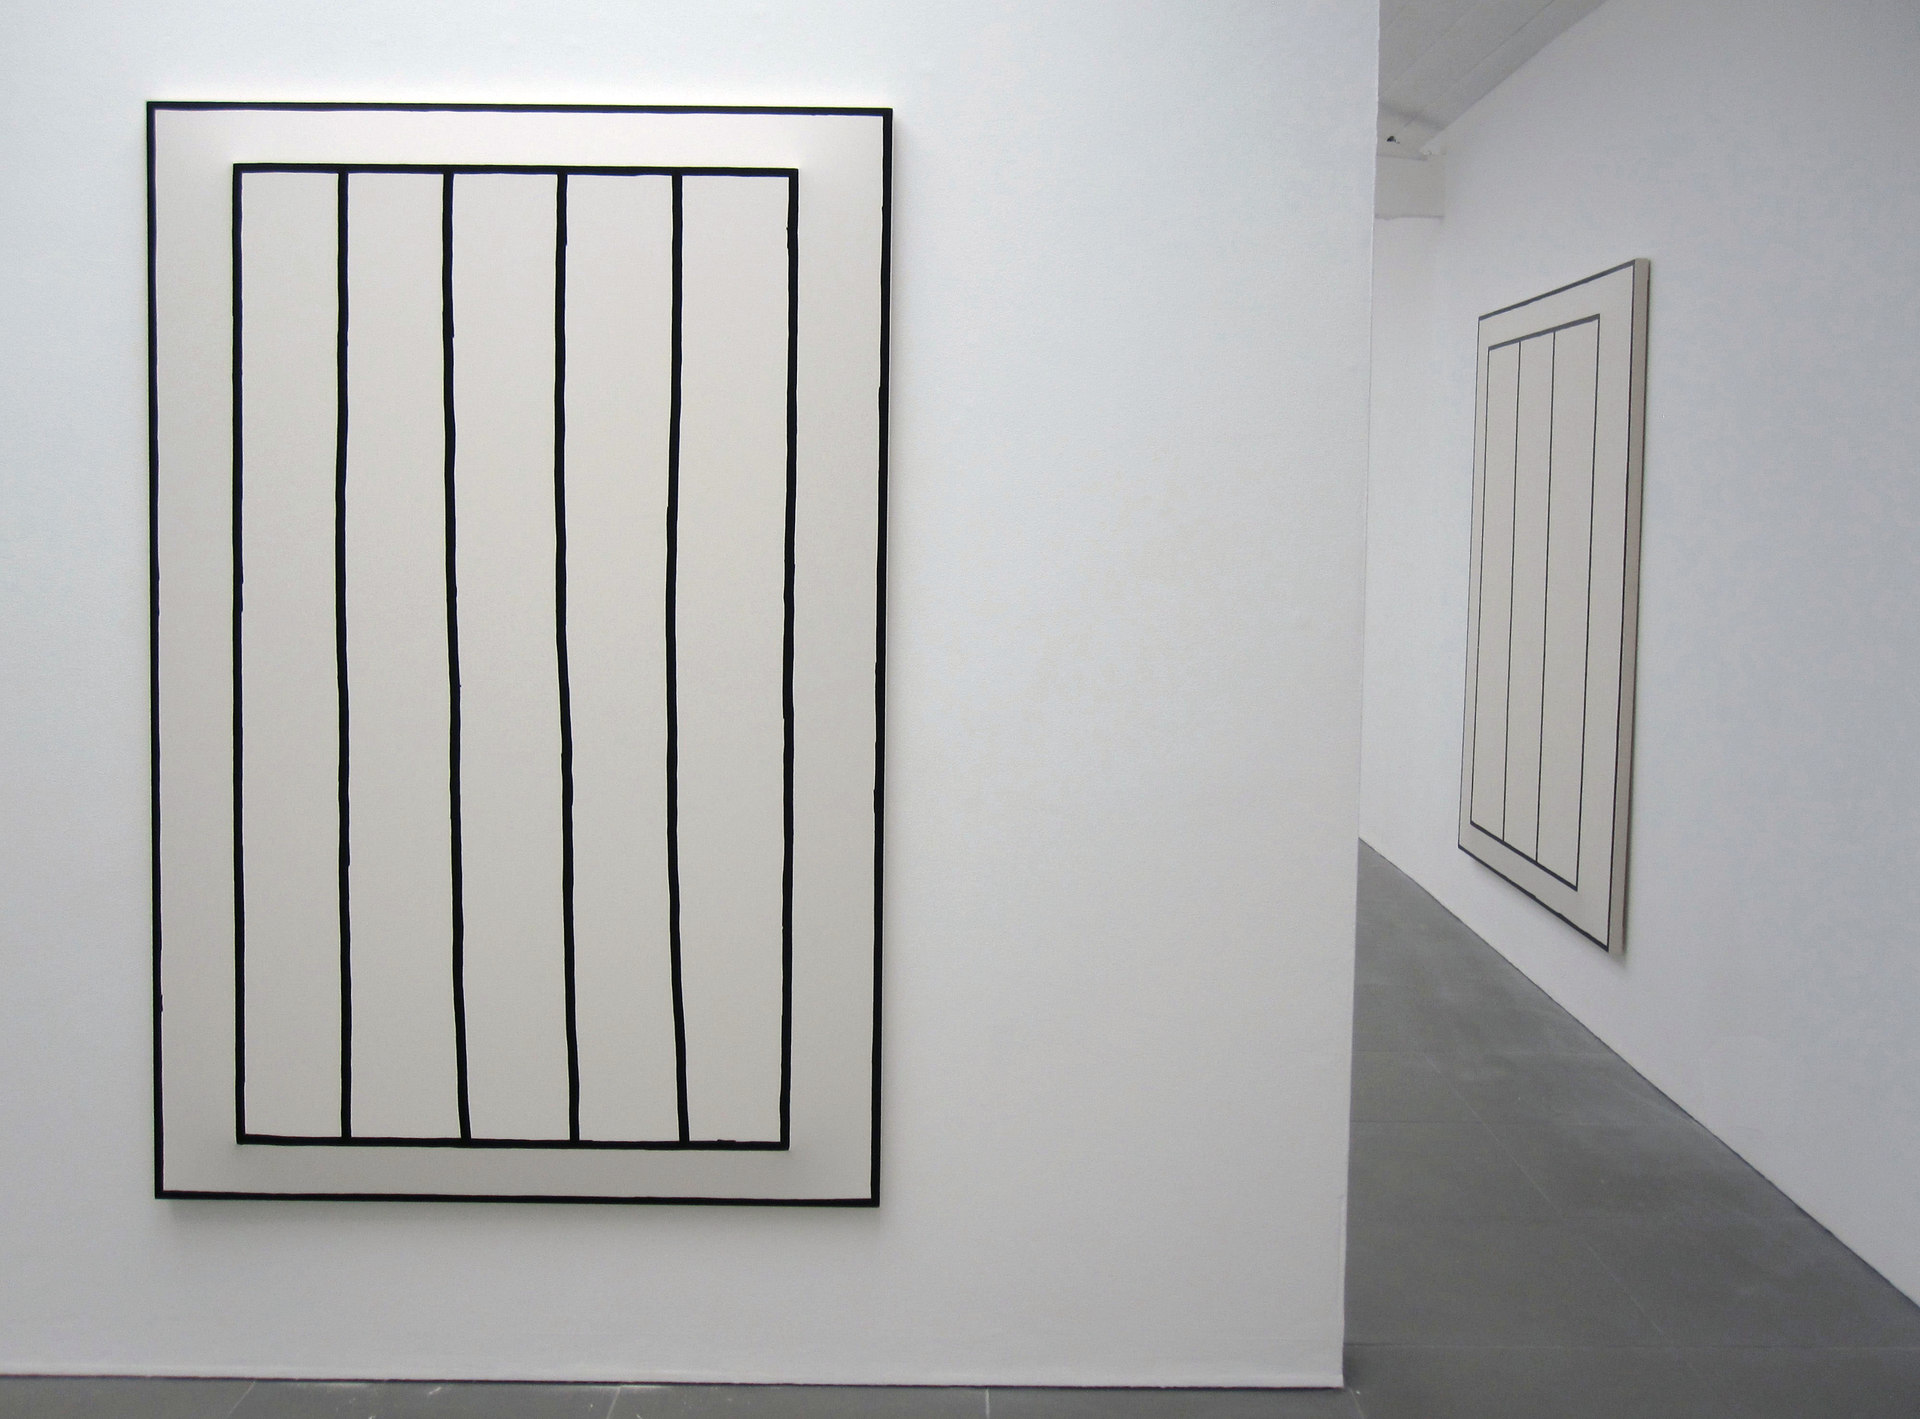 Oliver Perkins, 'ACCORDION', 2011, Cell Project Space